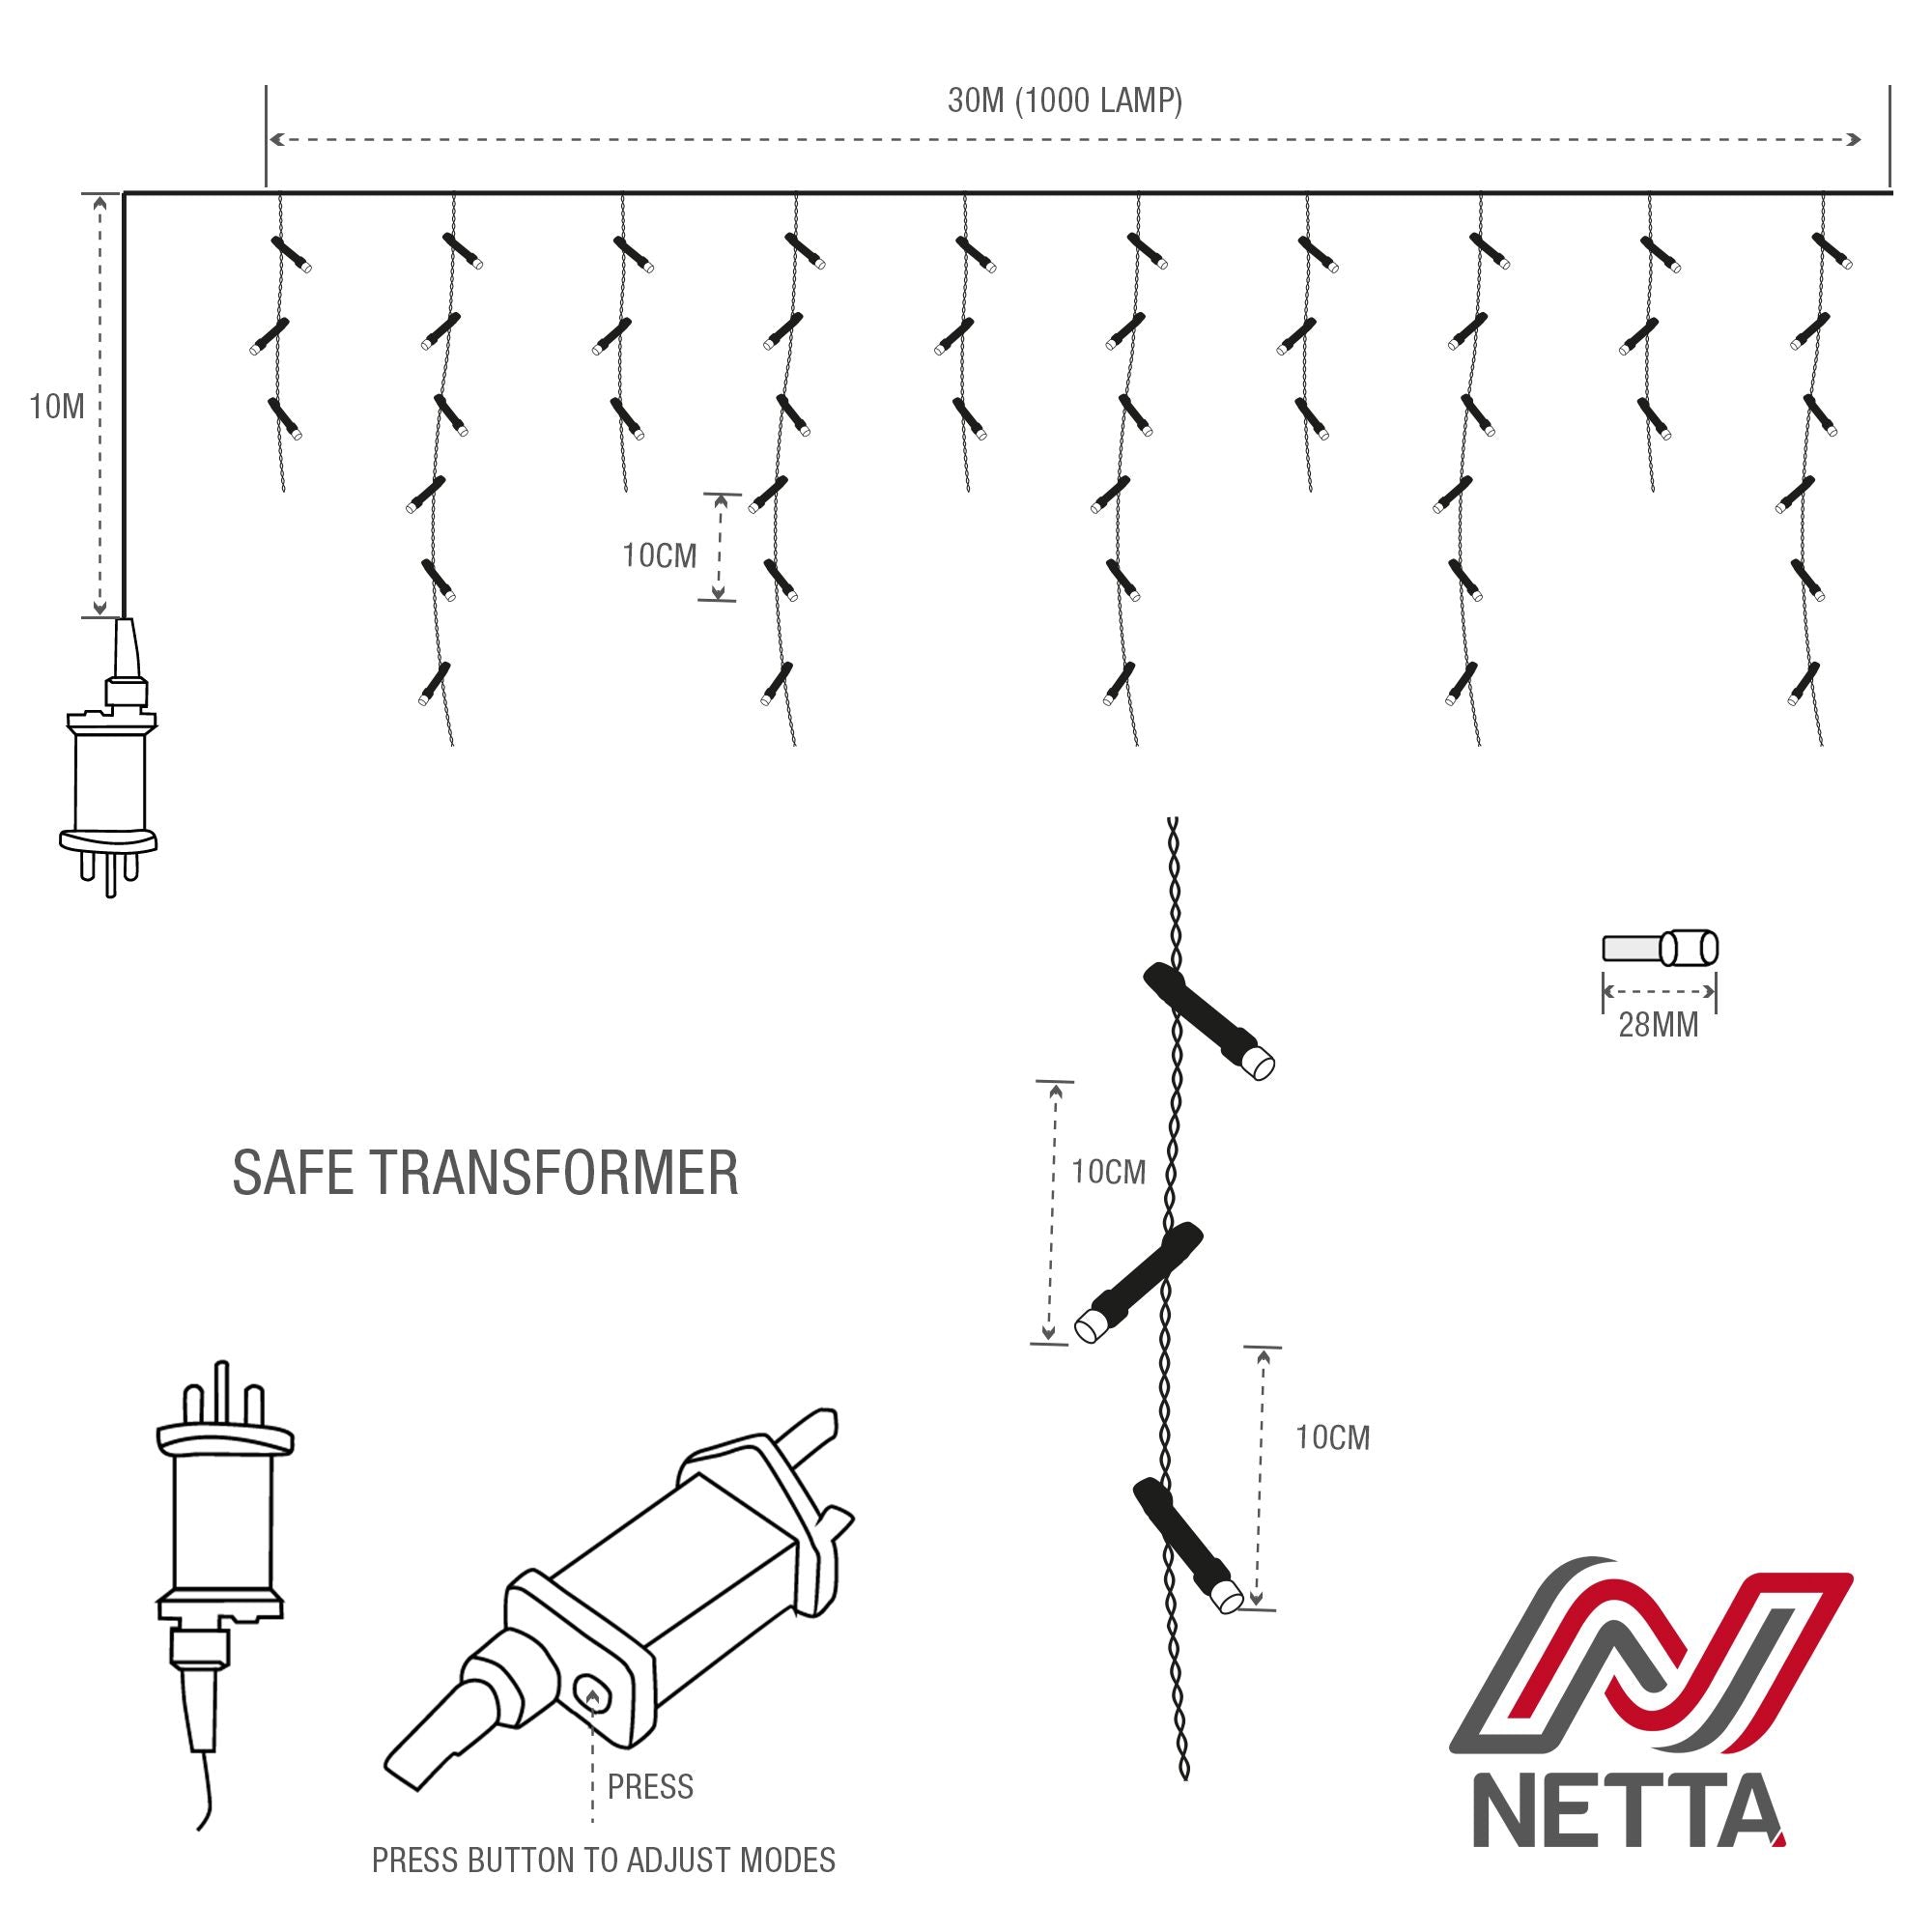 NETTA 1000 LED Icicle Lights 30M Outdoor - Cool White, with White Cable